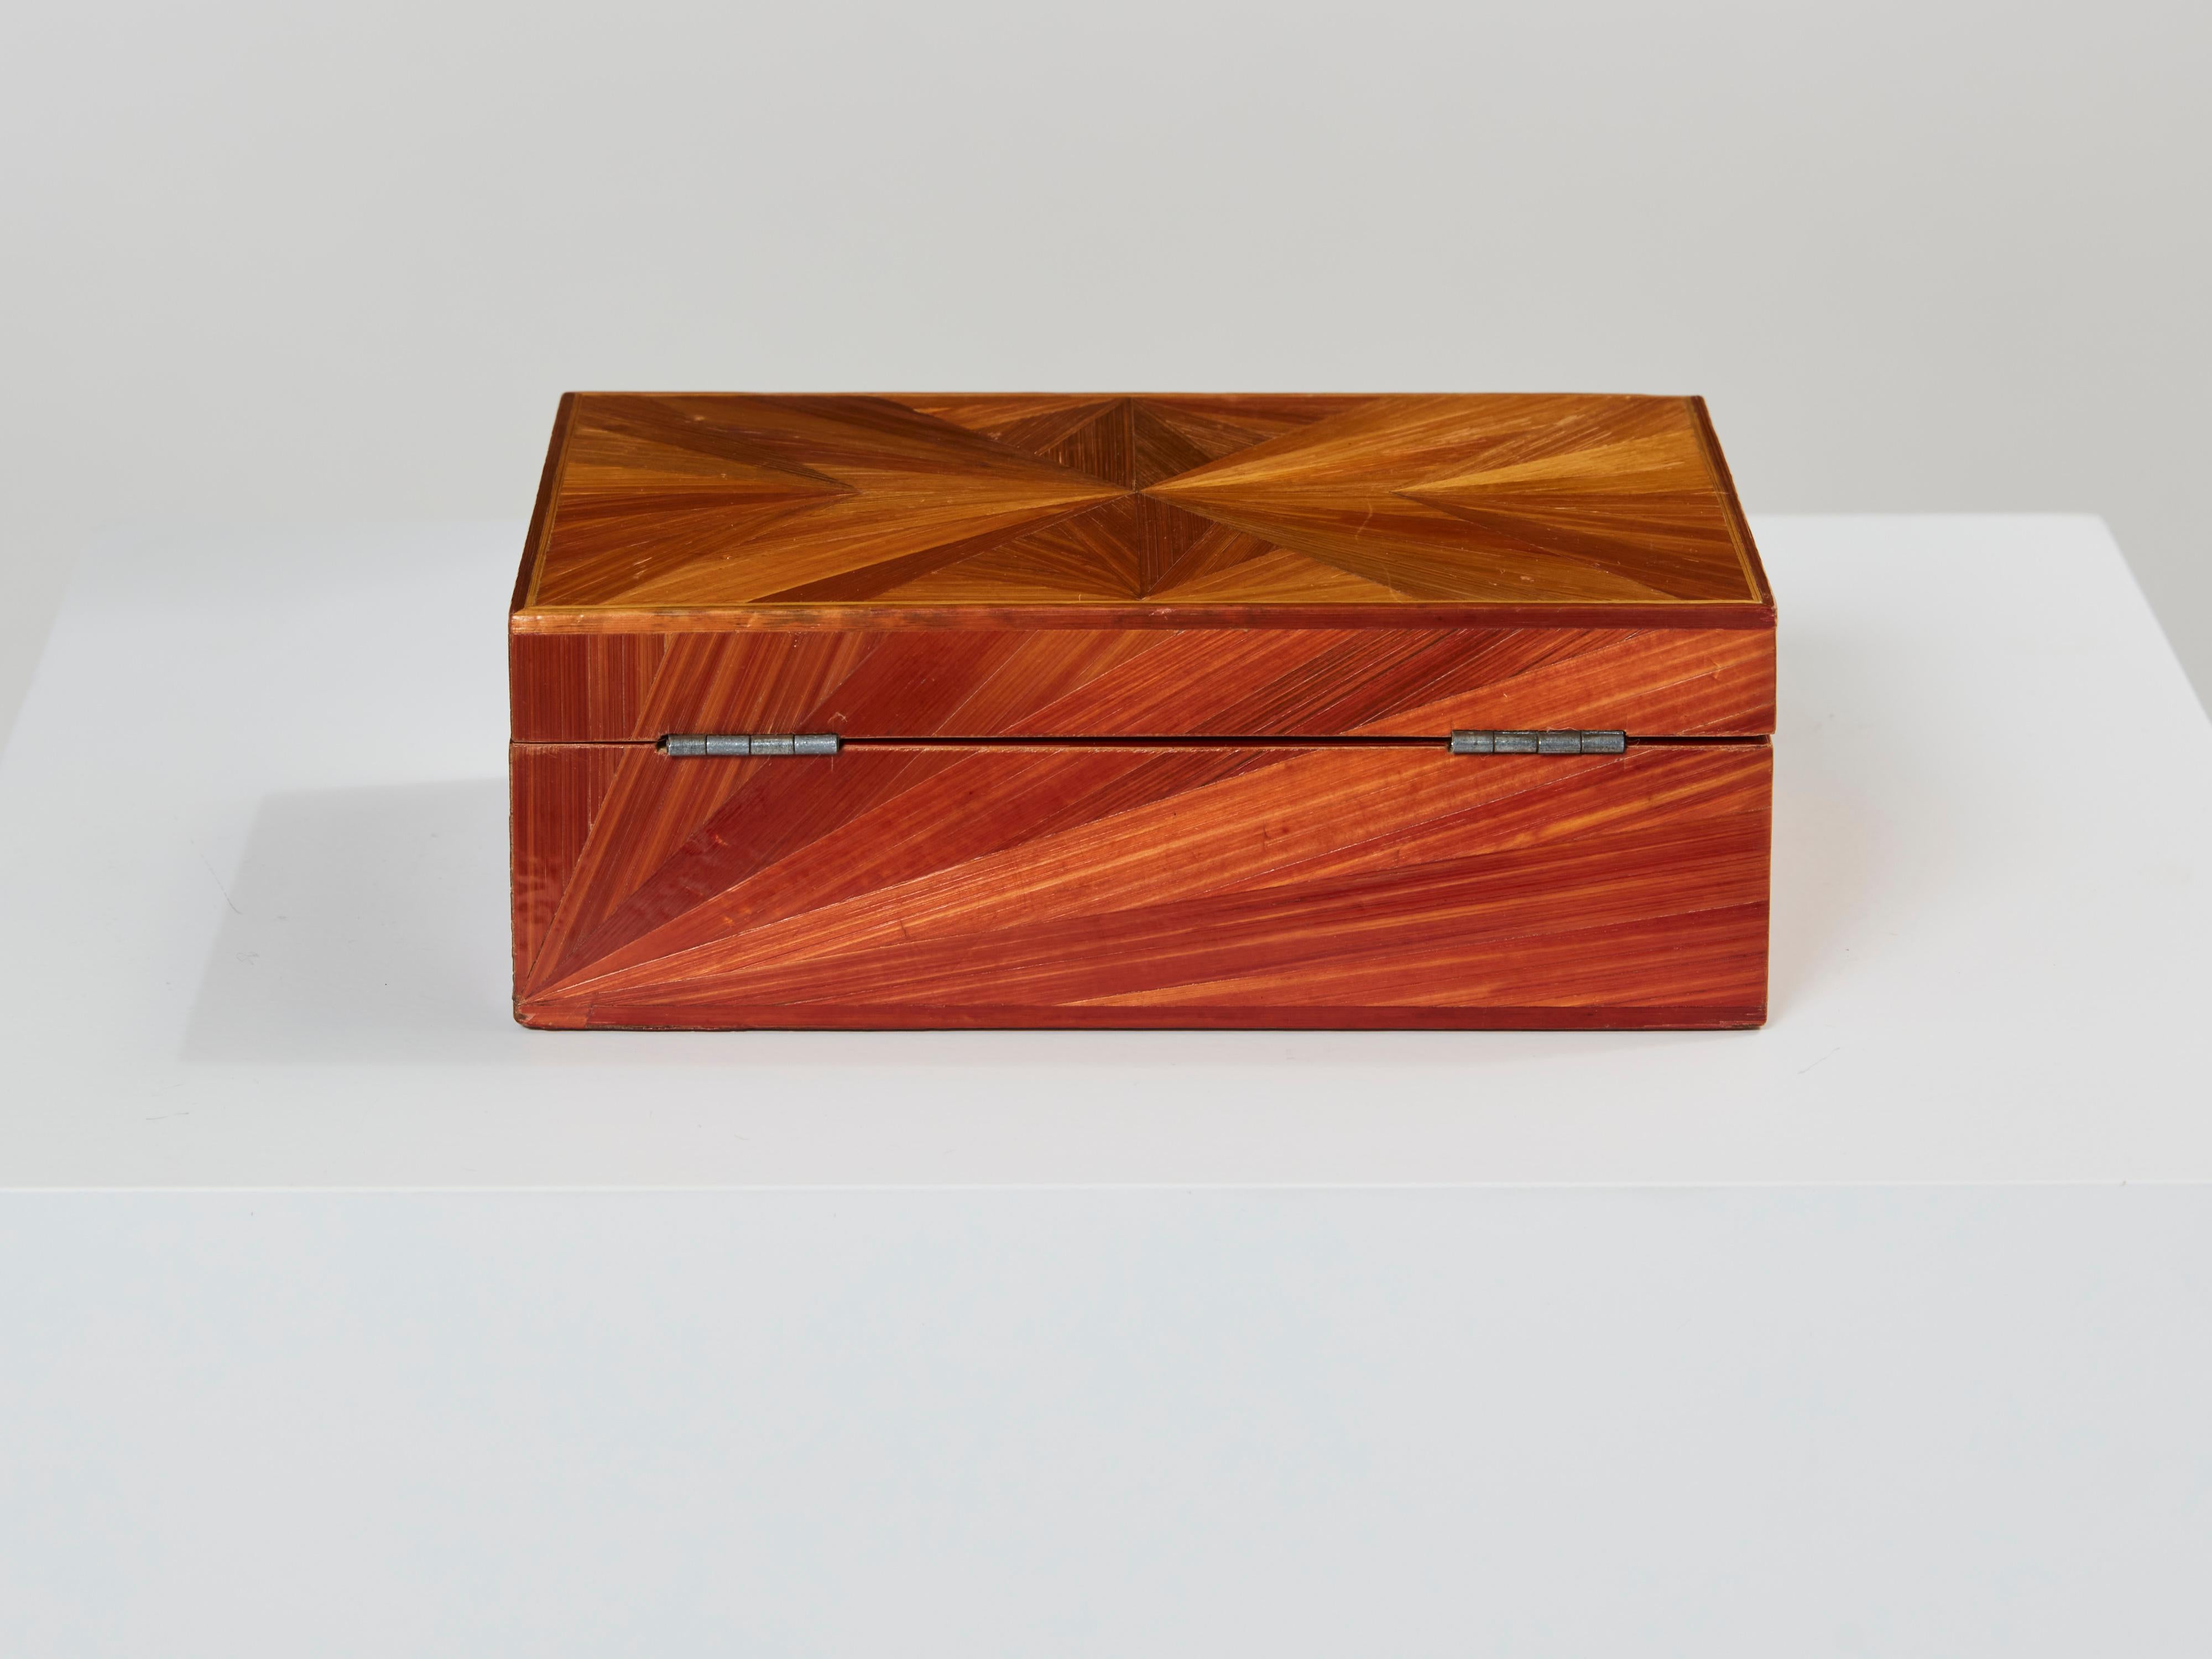 Jean-Michel Franck Straw Marquetry Box, 1930 For Sale 1